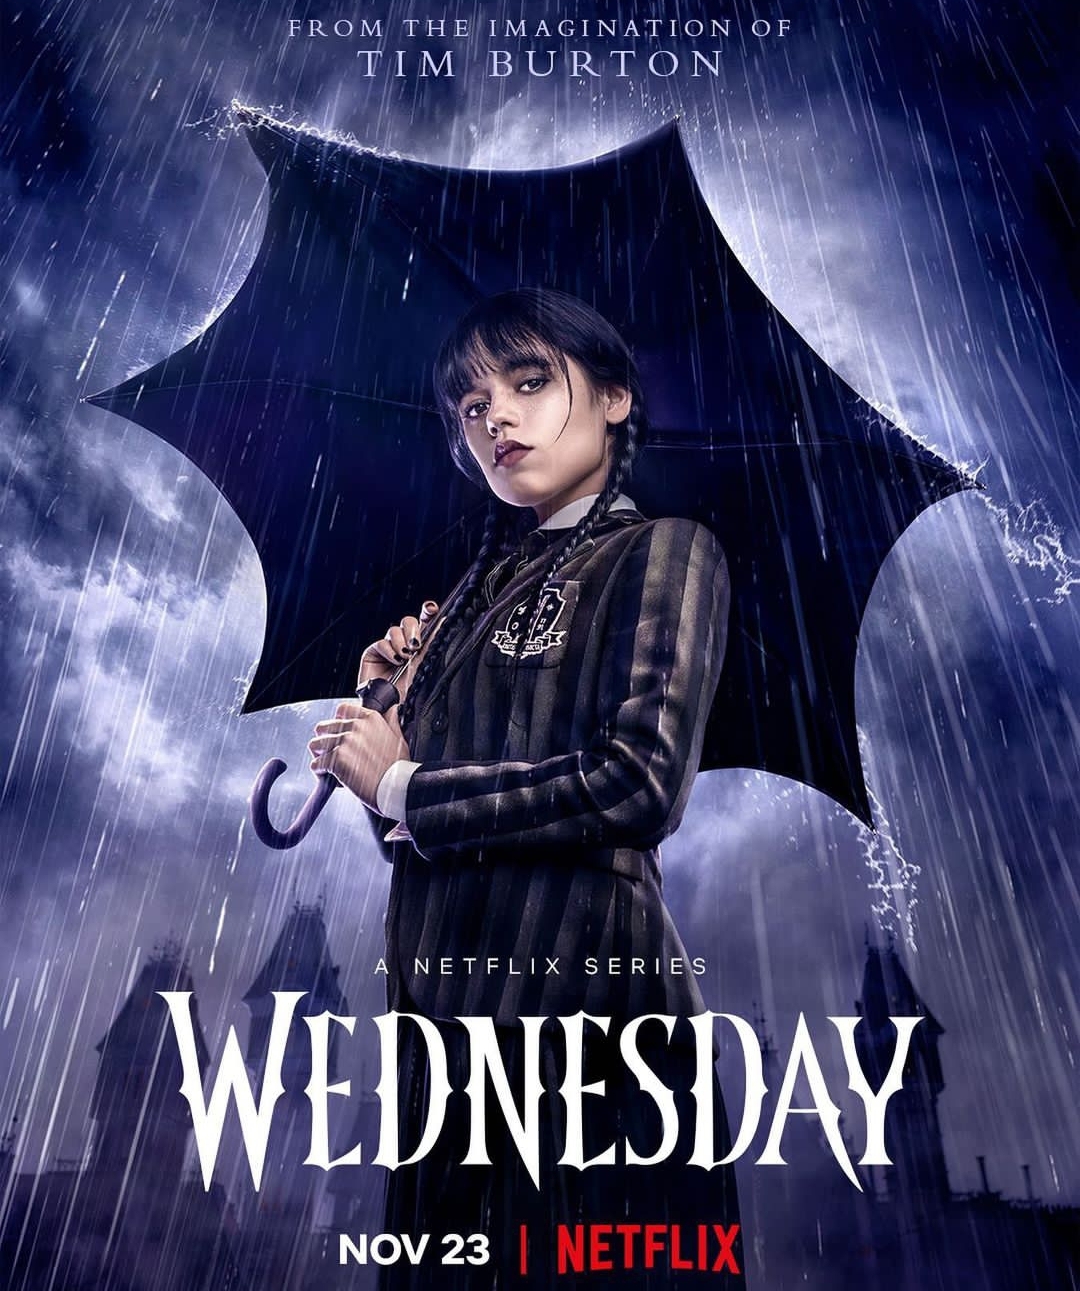 Movies: Let’s watch ‘Wednesday’ this Monday